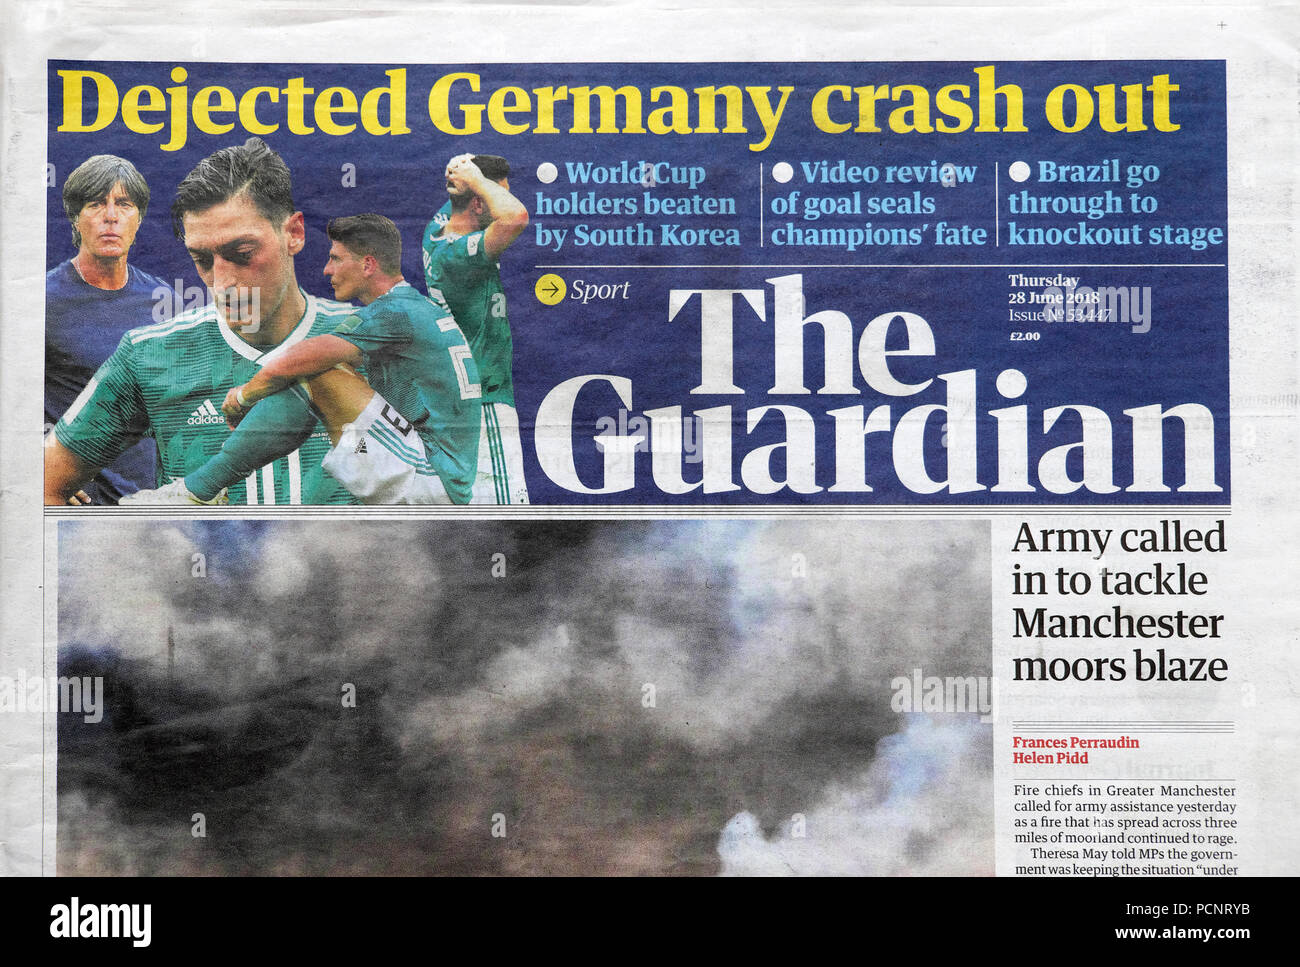 'Dejected Germany crash out' of the World Cup 2018 in Russia The Guardian Newspaper headline 28 June 2018 London UK Stock Photo